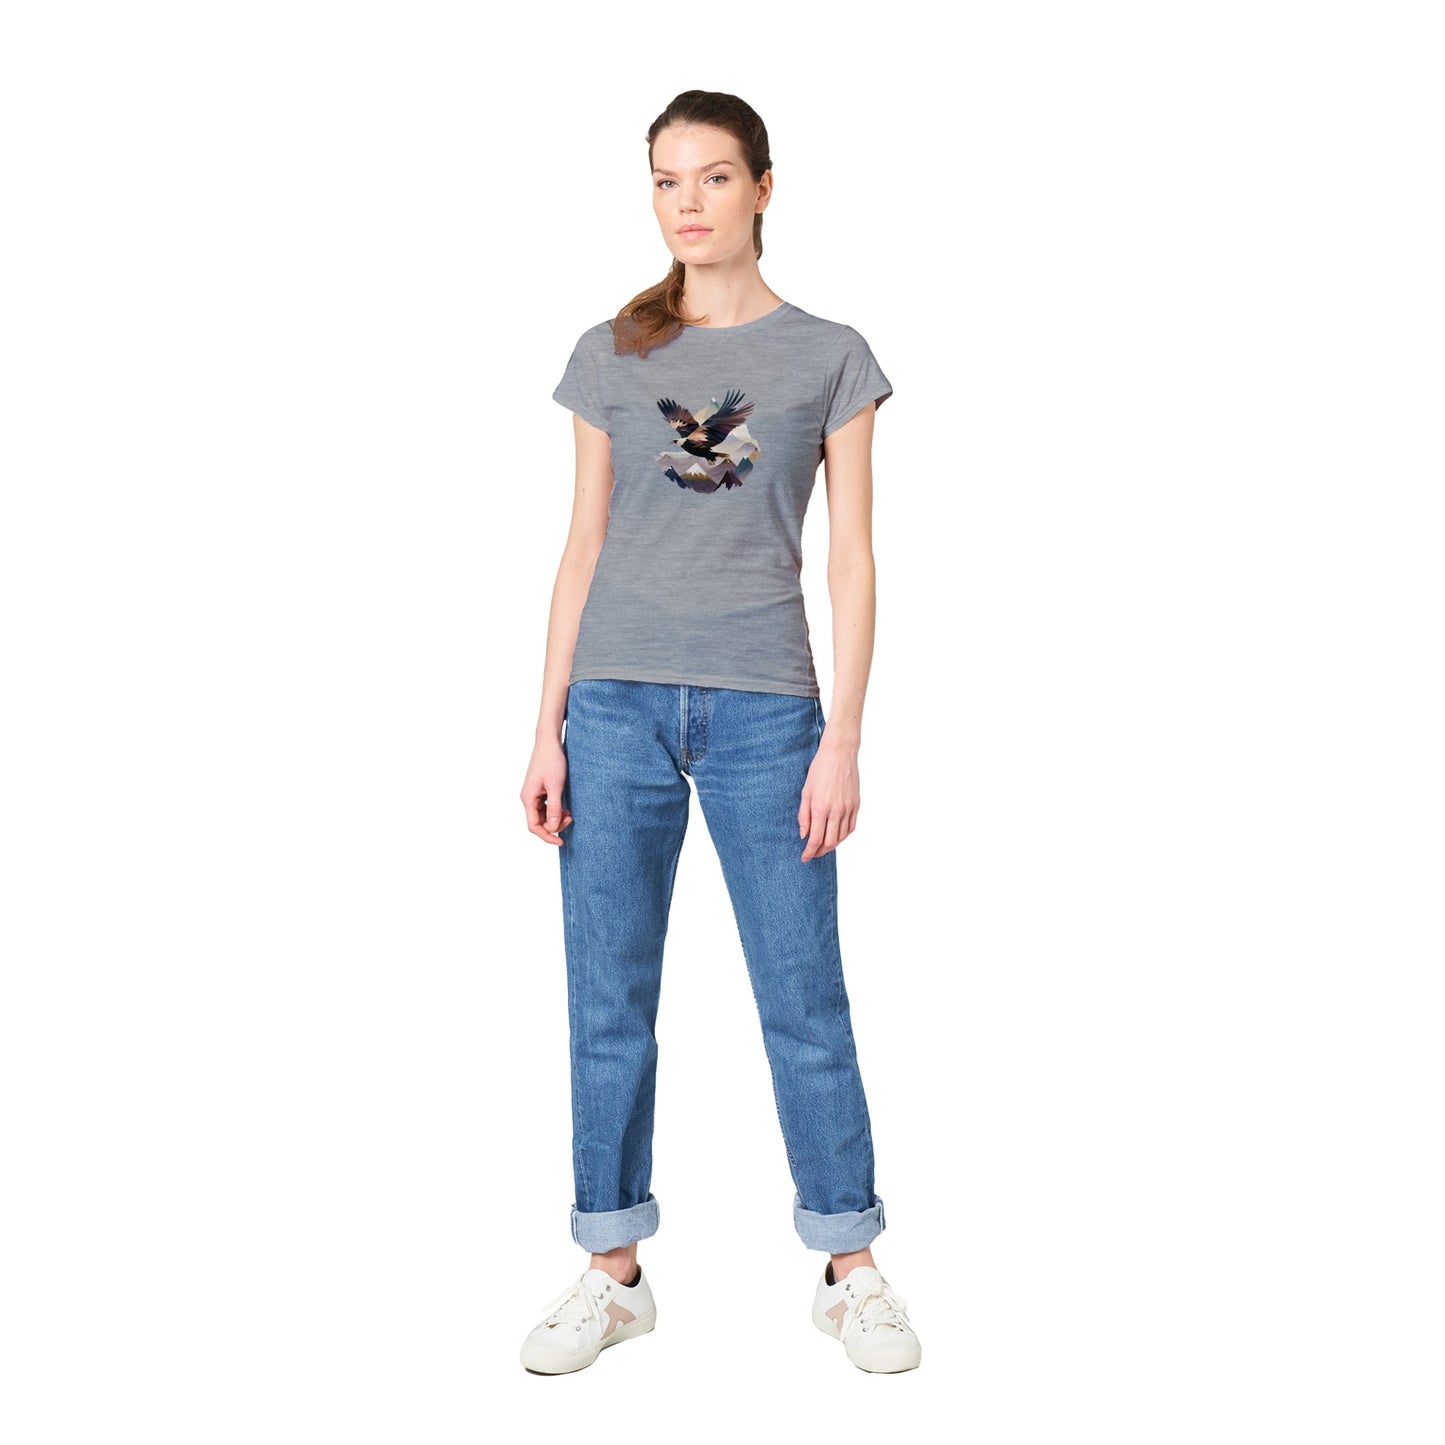 woman wearing a grey t-shirt with an eagle flying over a mountain range print